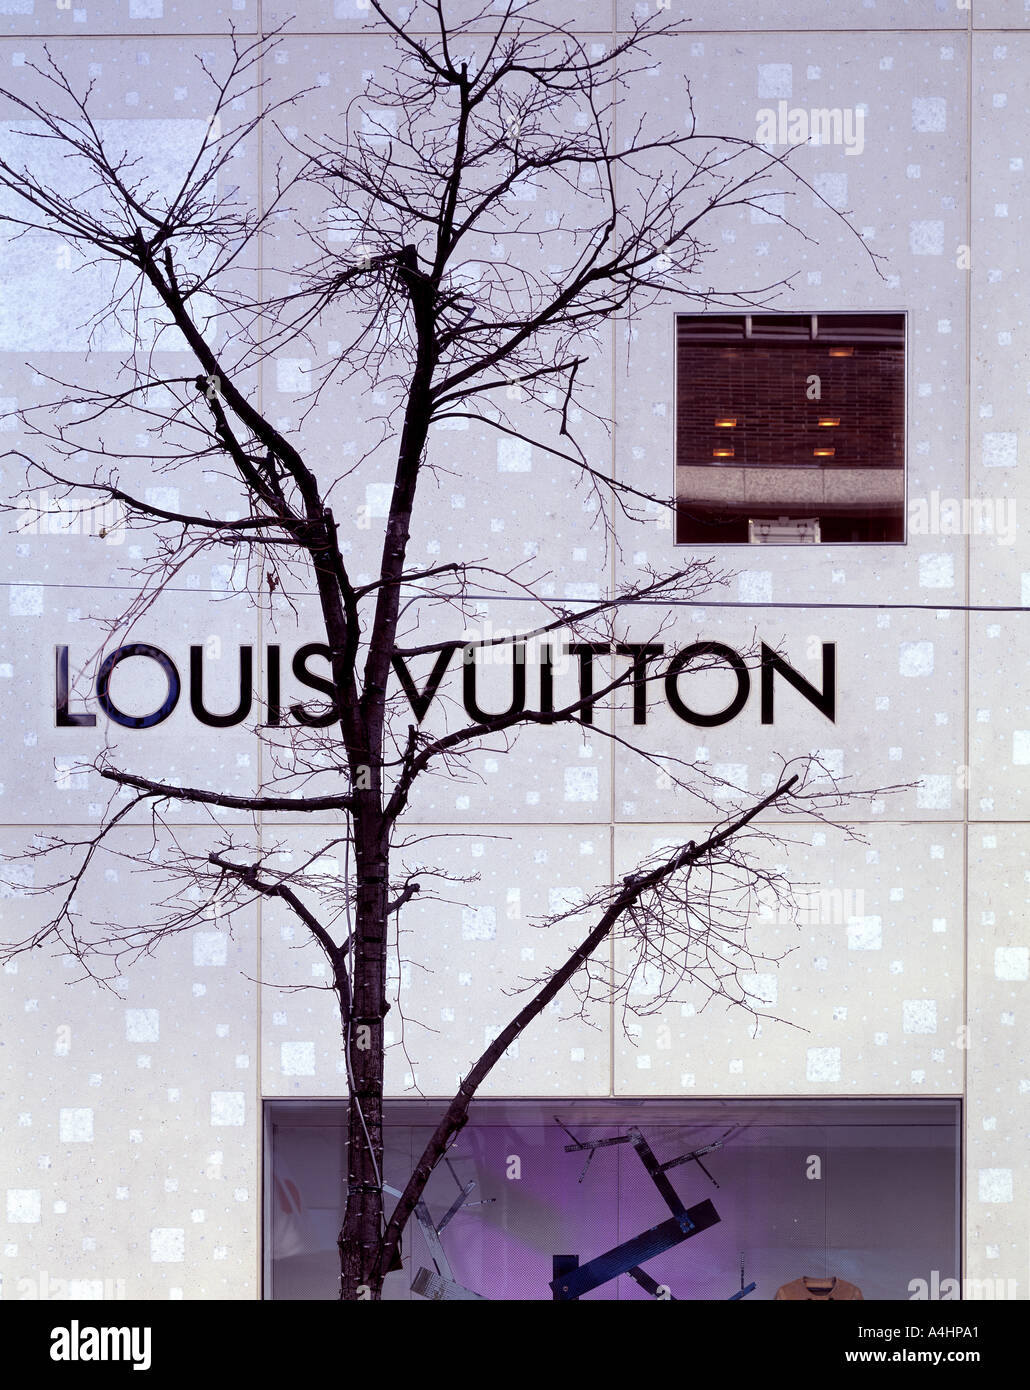 The new Louis Vuitton Ginza building by Jun Aoki is like a trippy